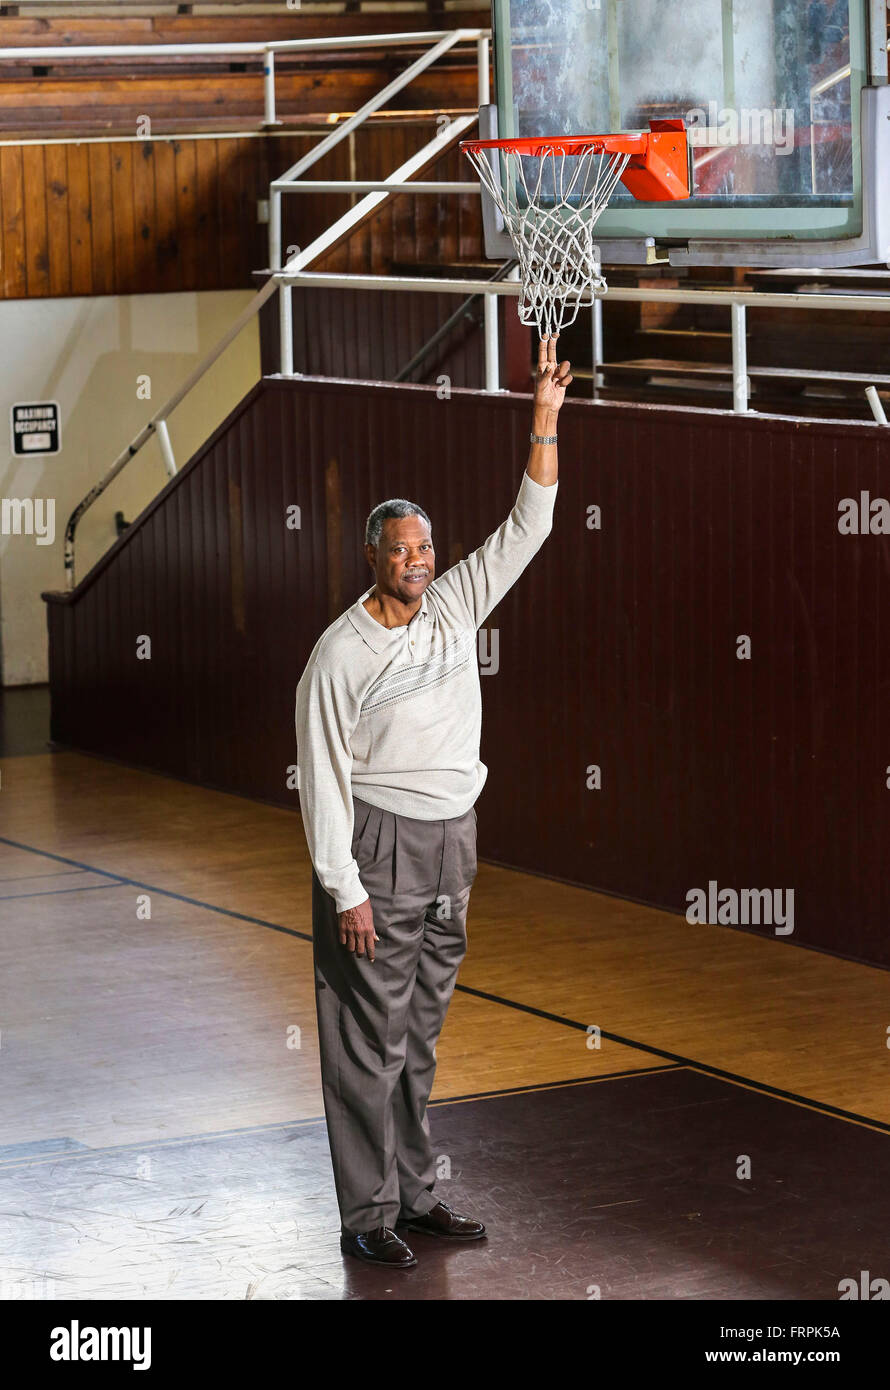 West Palm Beach, Florida, USA. 22nd Mar, 2016. Pembroke Burrows checks out the height of the net in the gym at the old Roosevelt High School Tuesday morning, March 22, 2016, where he played basketball. He wound playing in college and helping Jacksonville reach the 1970 NCAA final, where it lost to UCLA. He was later the third black Florida state trooper and later returned to West Palm Beach to be a spokesman for the troopers. He still lives here. © Lannis Waters/The Palm Beach Post/ZUMA Wire/Alamy Live News Stock Photo